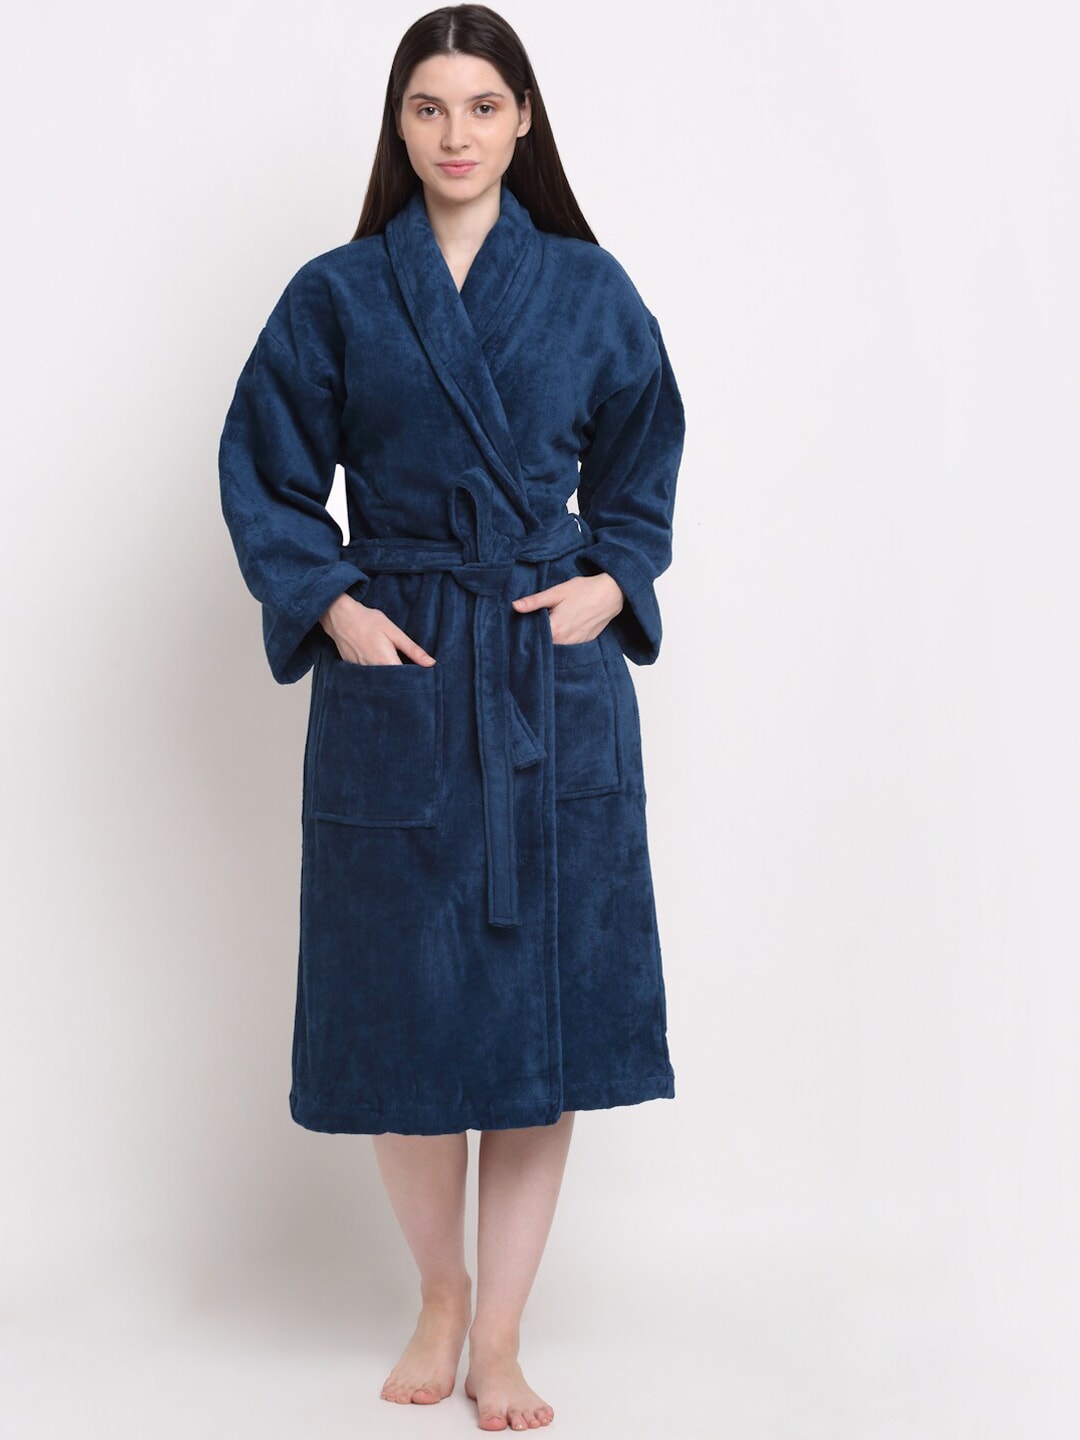 Creeva Blue Bath Robe With Pockets Price in India